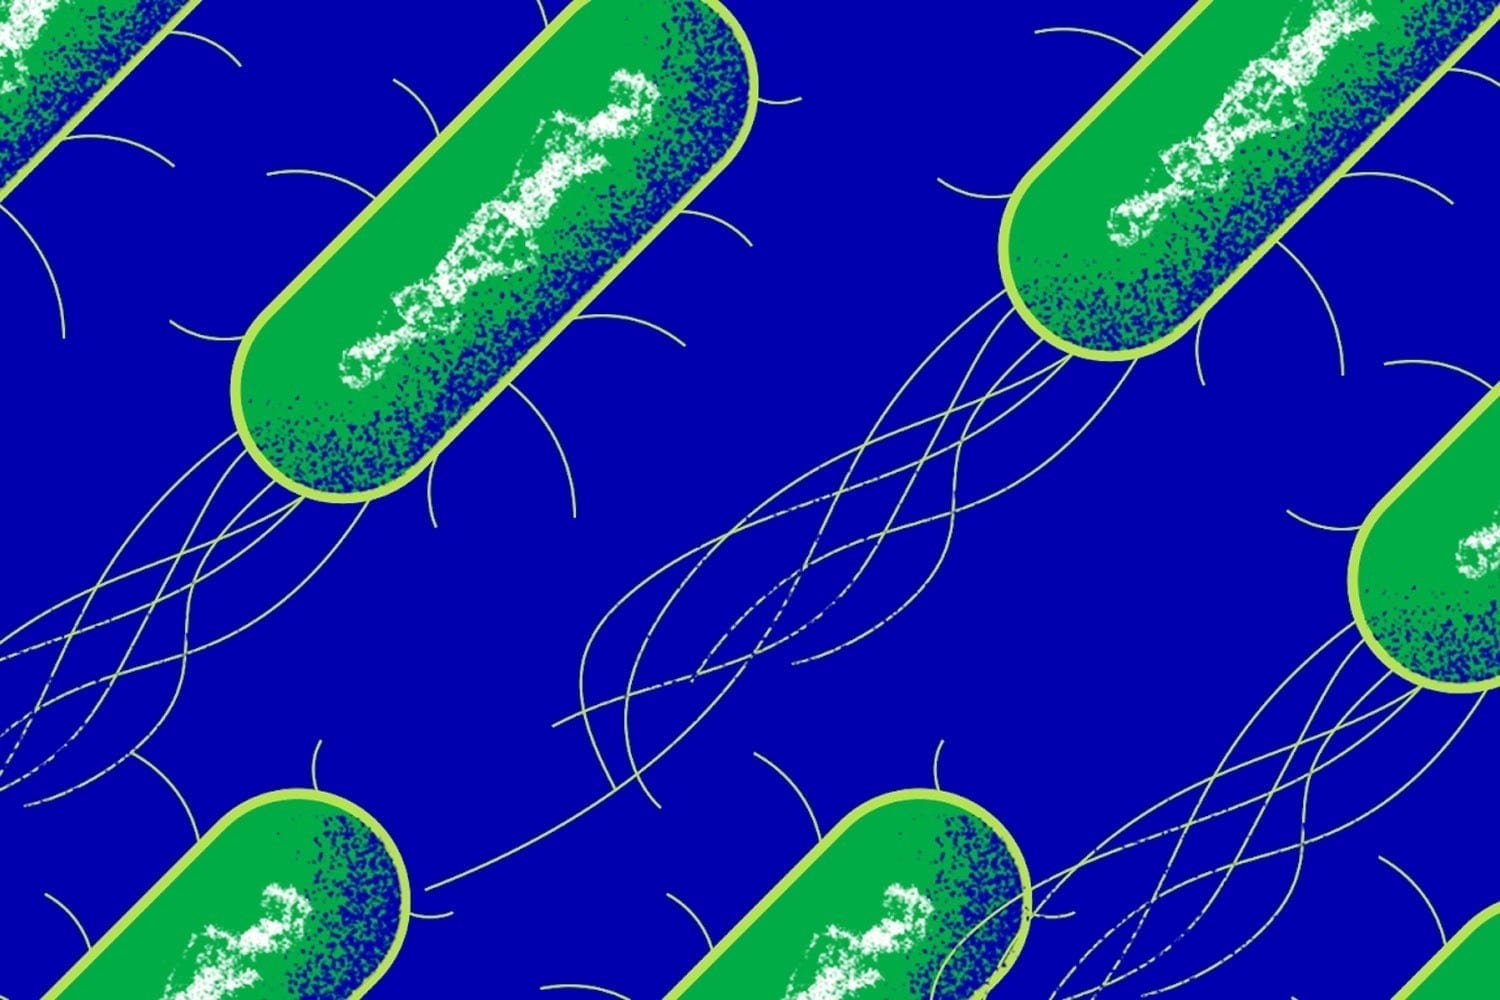 A new approach to treating infection by targeting bacterial armor